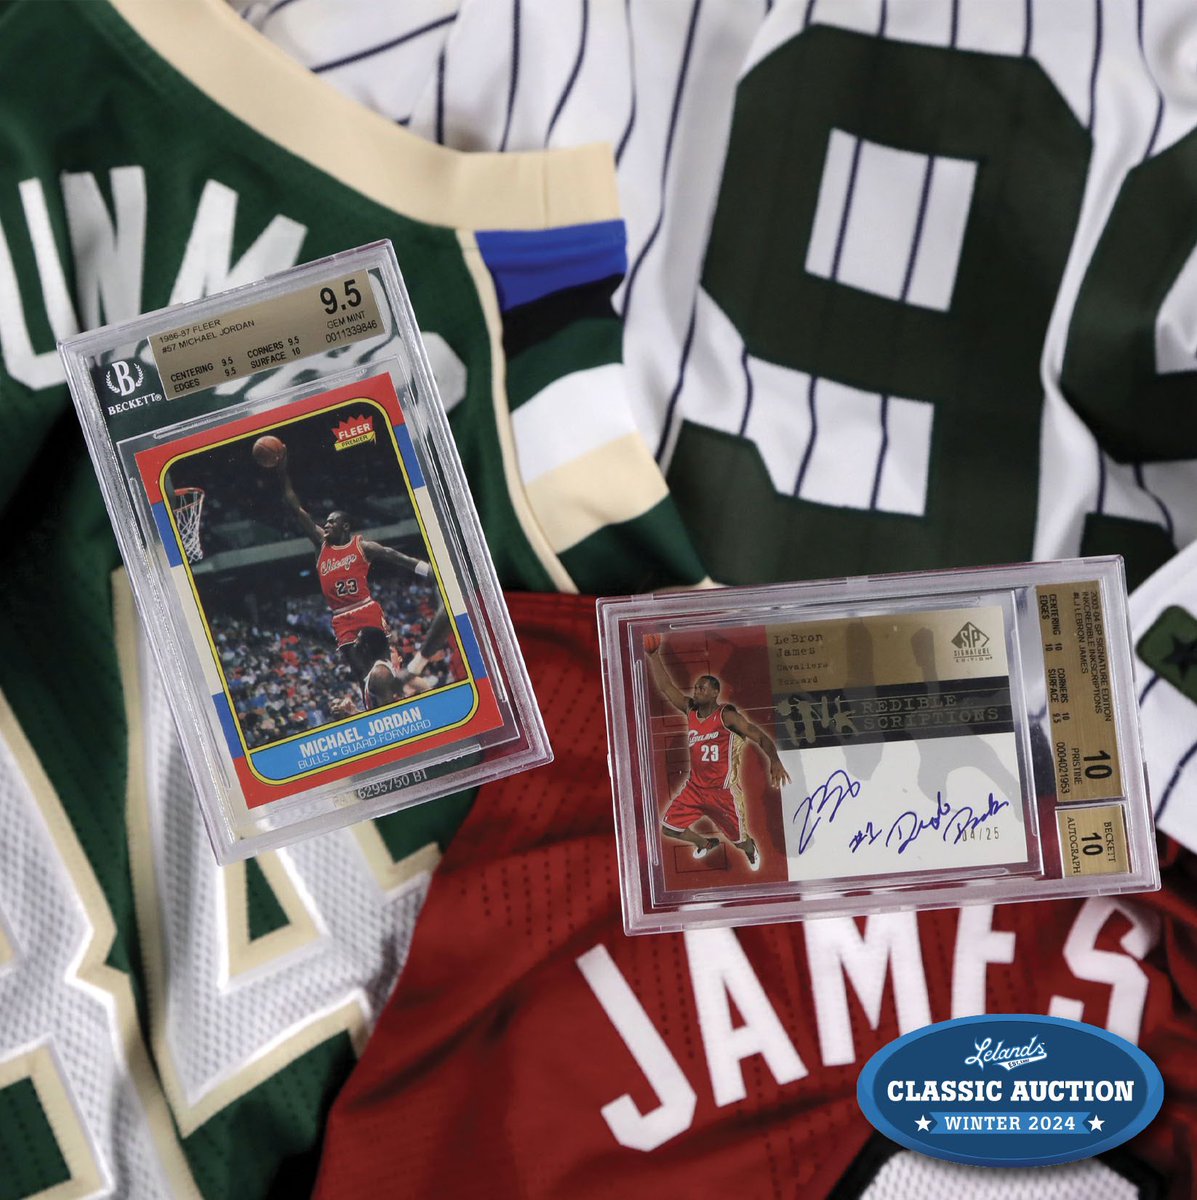 Modern Marvels! Experience the Past, Present, and Future! Dive into the auction and explore a variety of modern treasures featuring Giannis Antetokounmpo, Michael Jordan, LeBron James, and Aaron Judge!  auction.lelands.com/Lots/Gallery The Winter Classic Closes Mar 16 at 10 PM ET